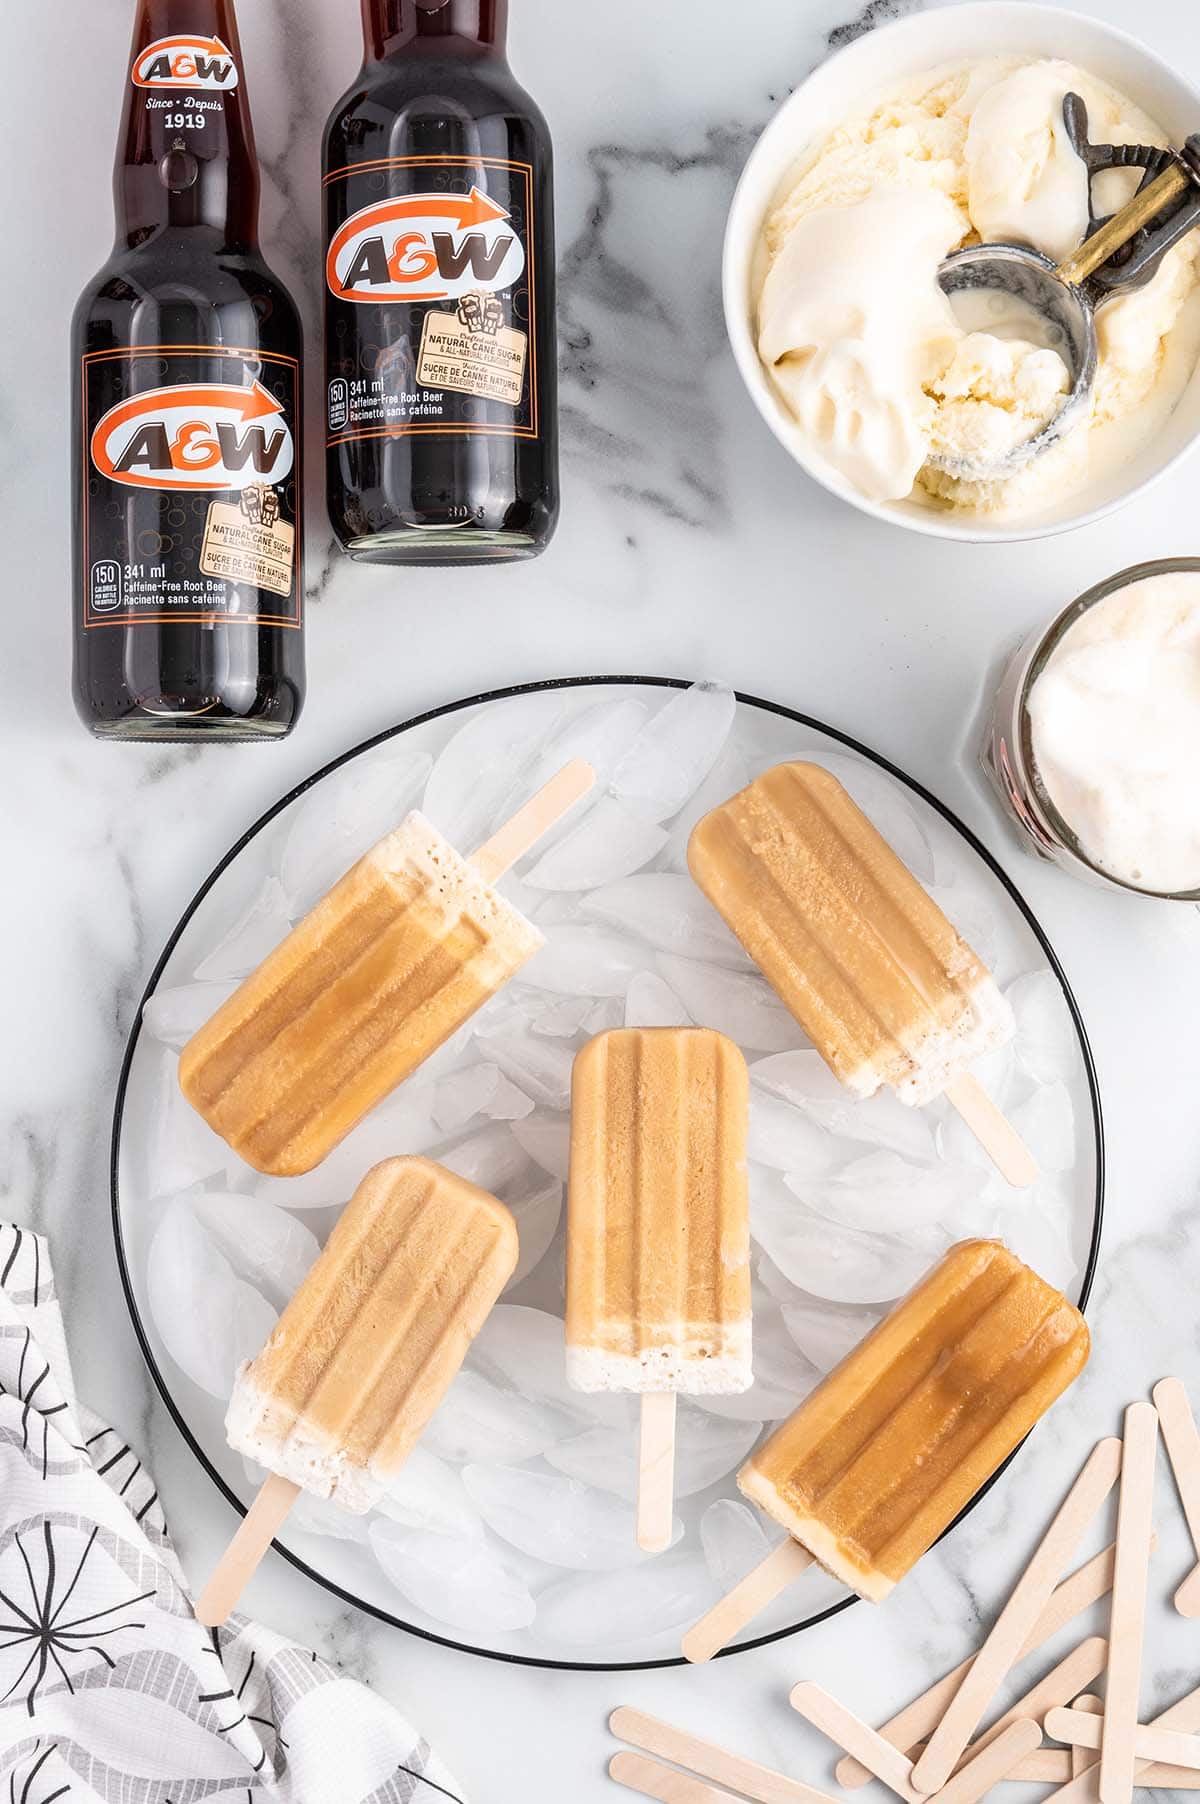 Root Beer Popsicles on a plate